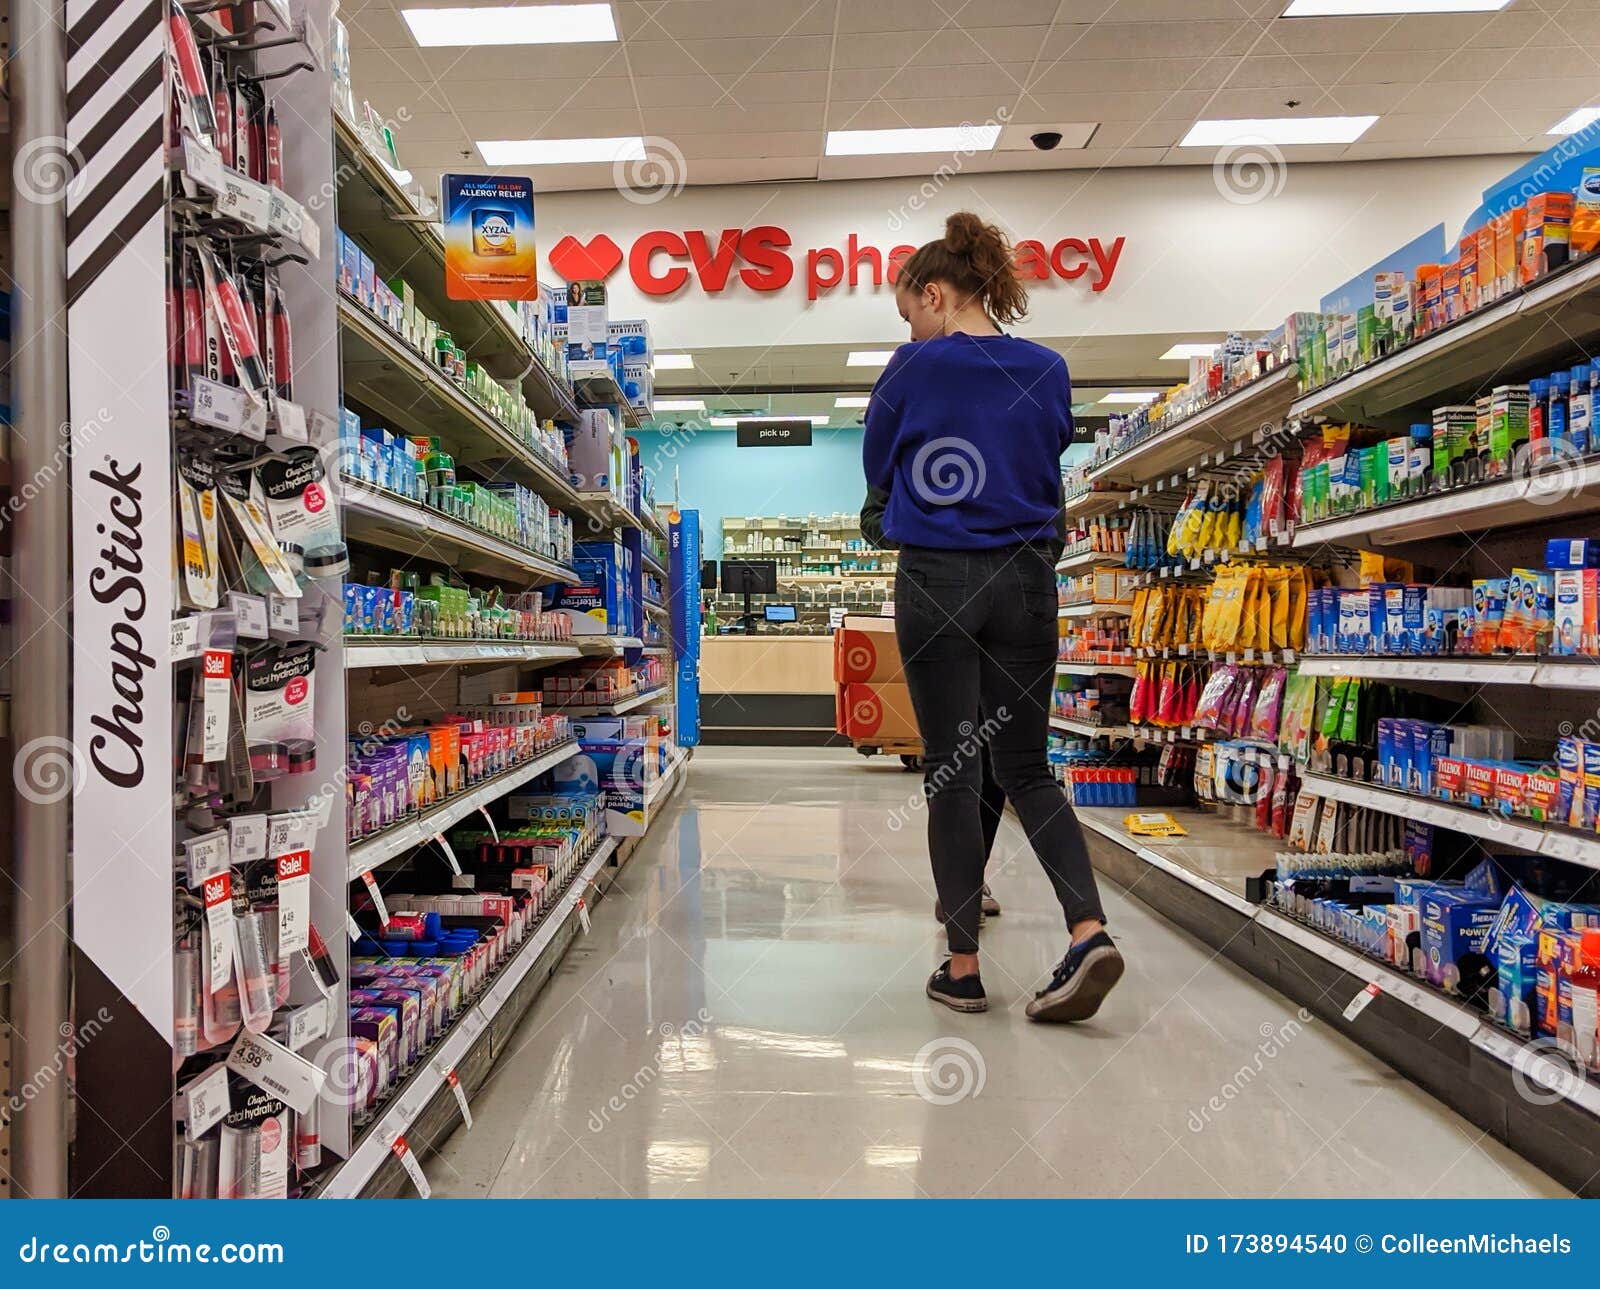 Woman Browsing Medicine and Supplements in the CVS Pharmacy Inside a ...